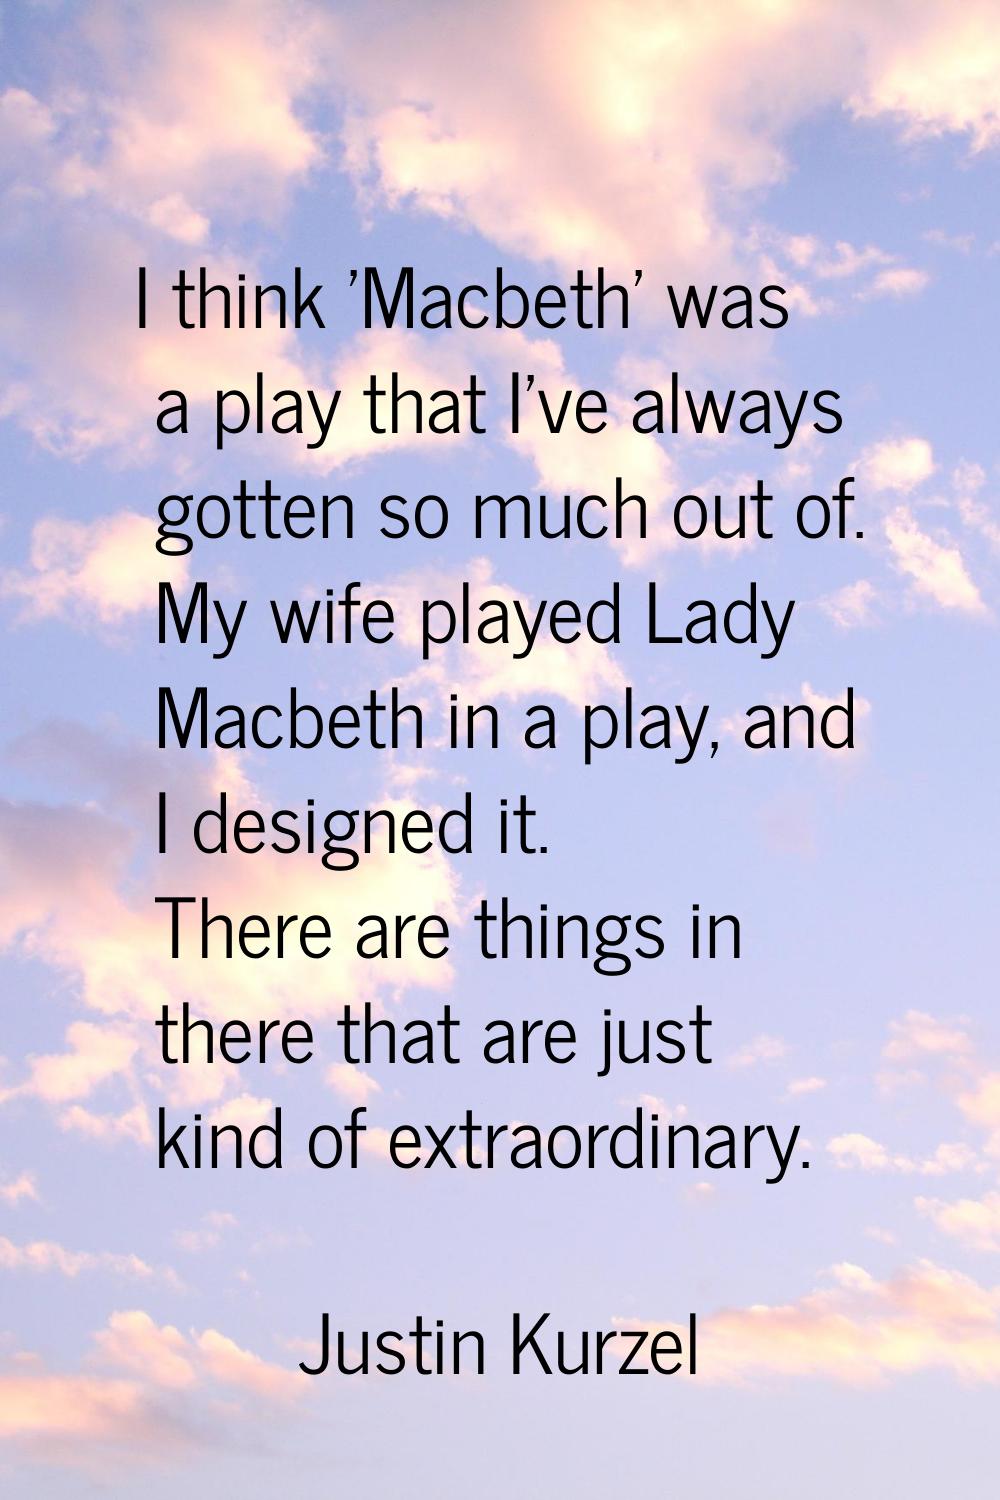 I think 'Macbeth' was a play that I've always gotten so much out of. My wife played Lady Macbeth in